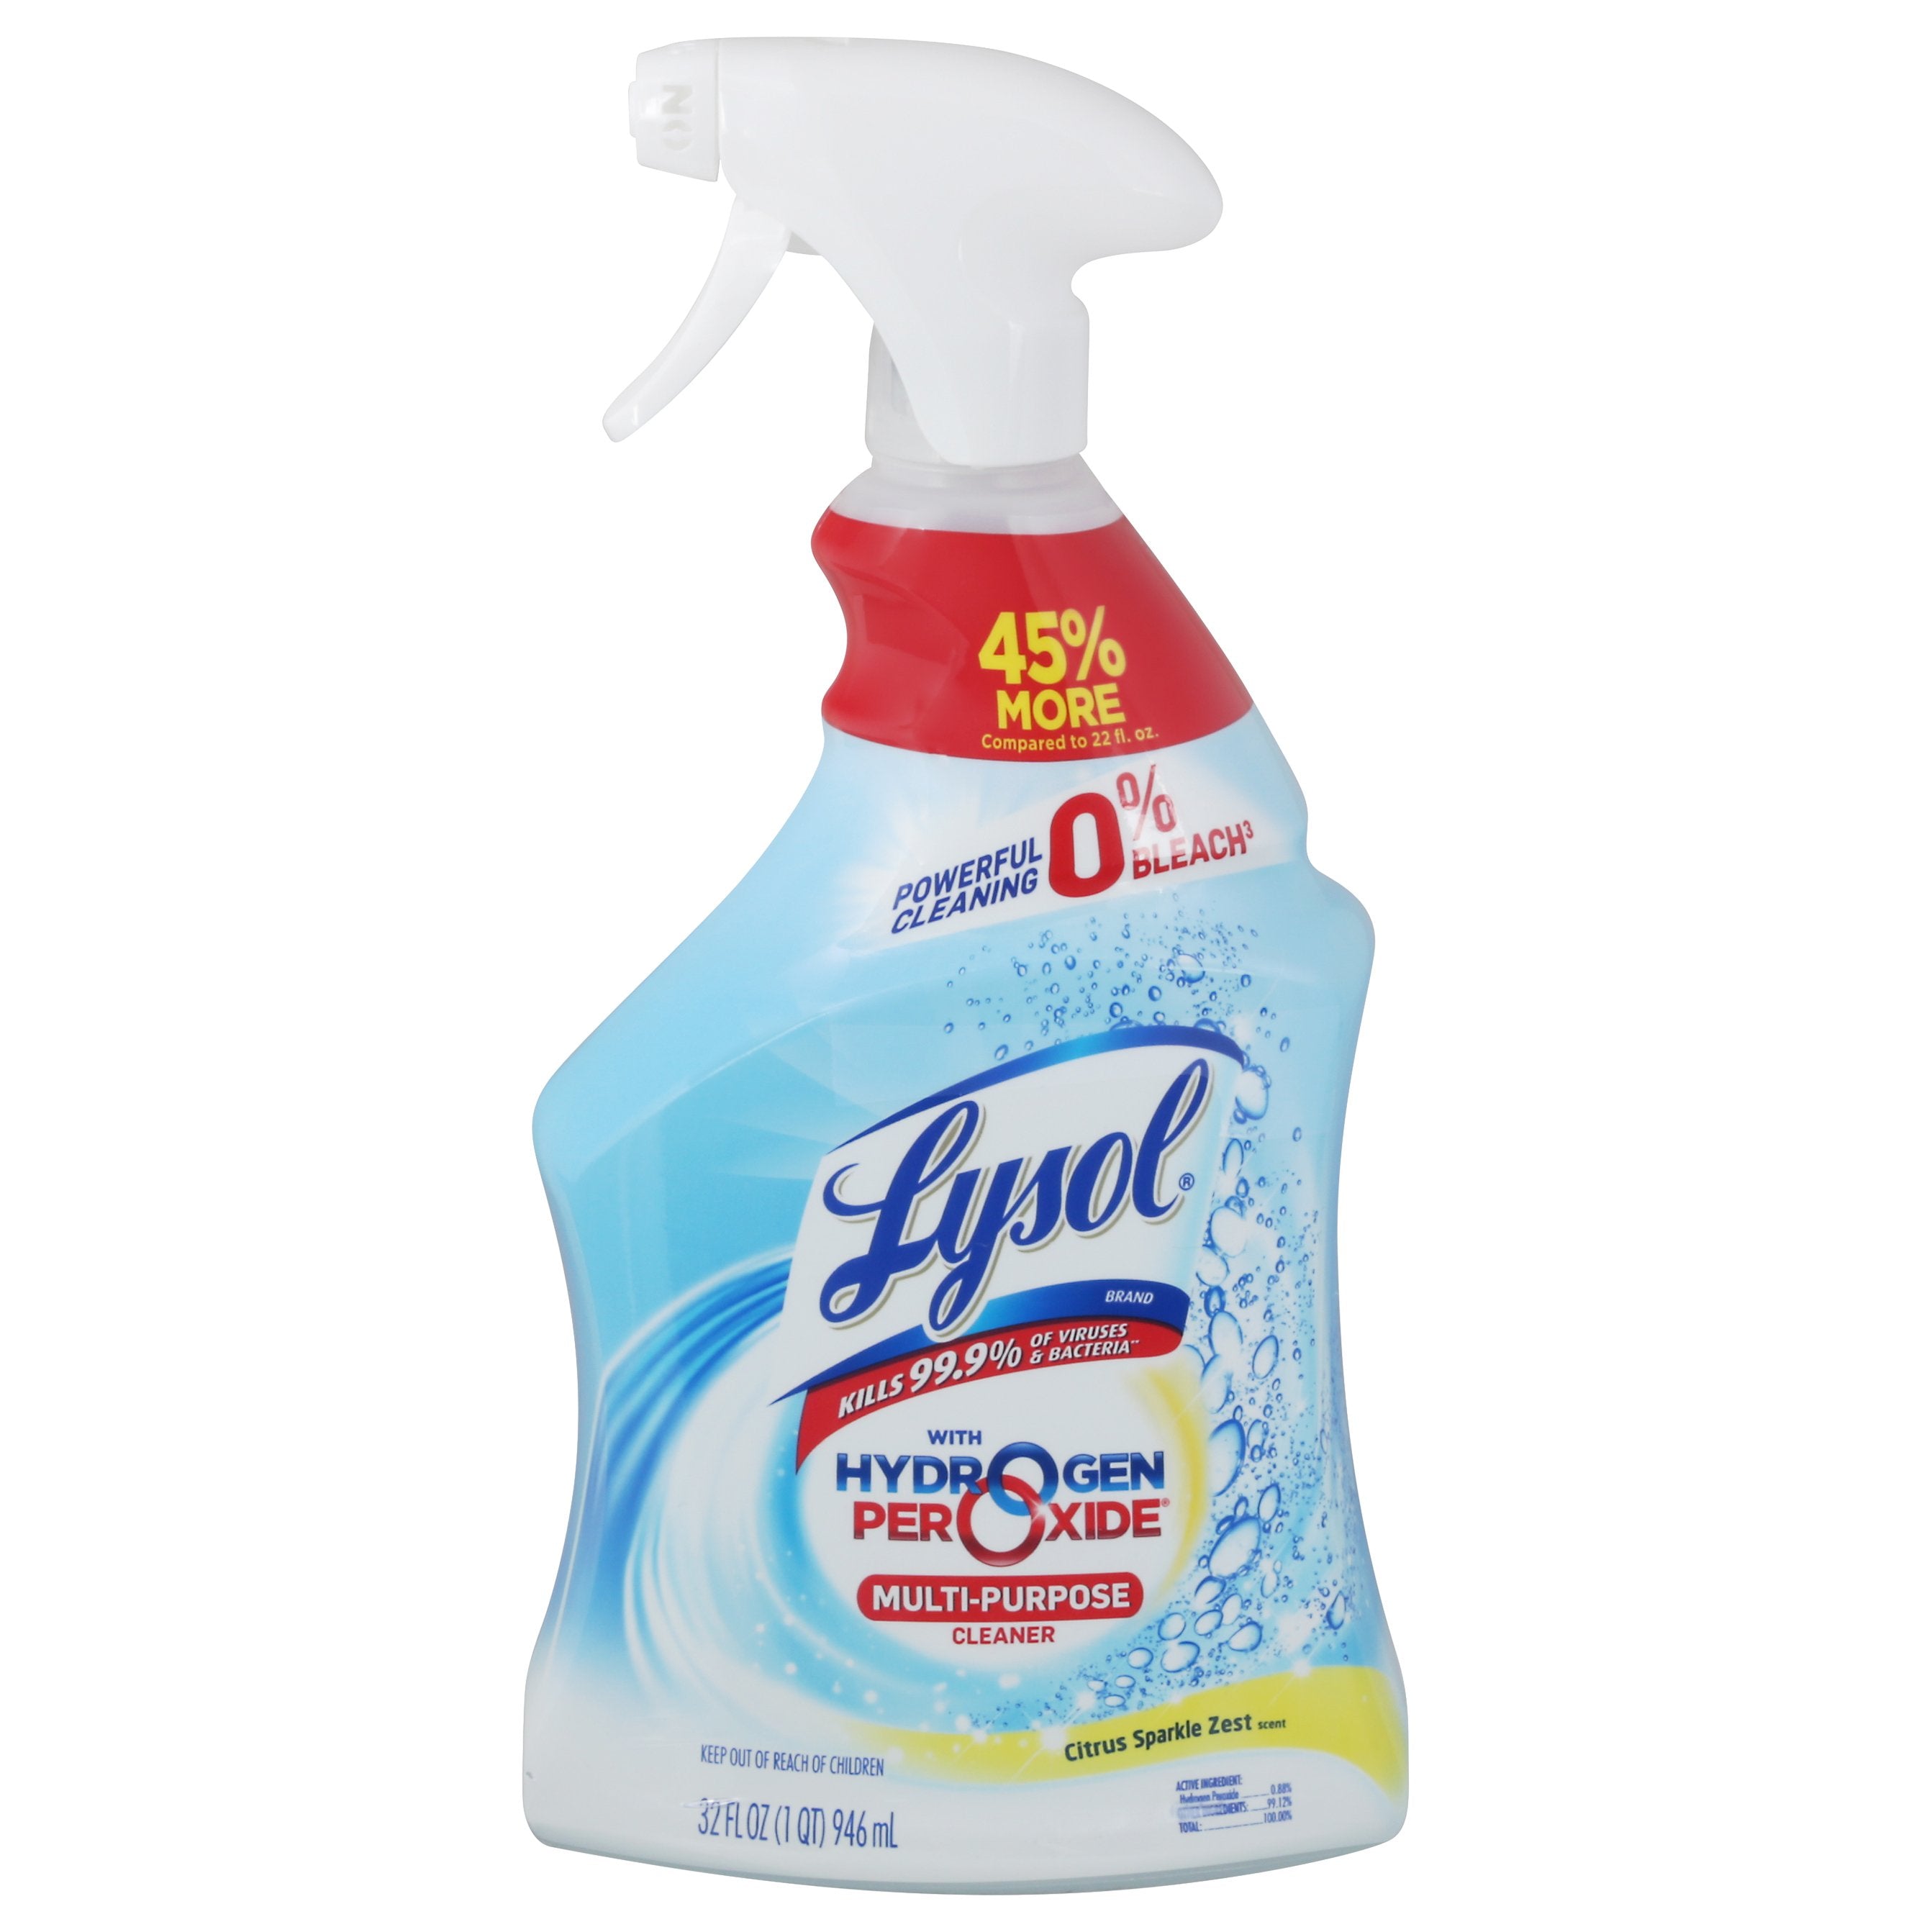 Lysol Power Bathroom Cleaner, 32 fl oz/946 mL Ingredients and Reviews